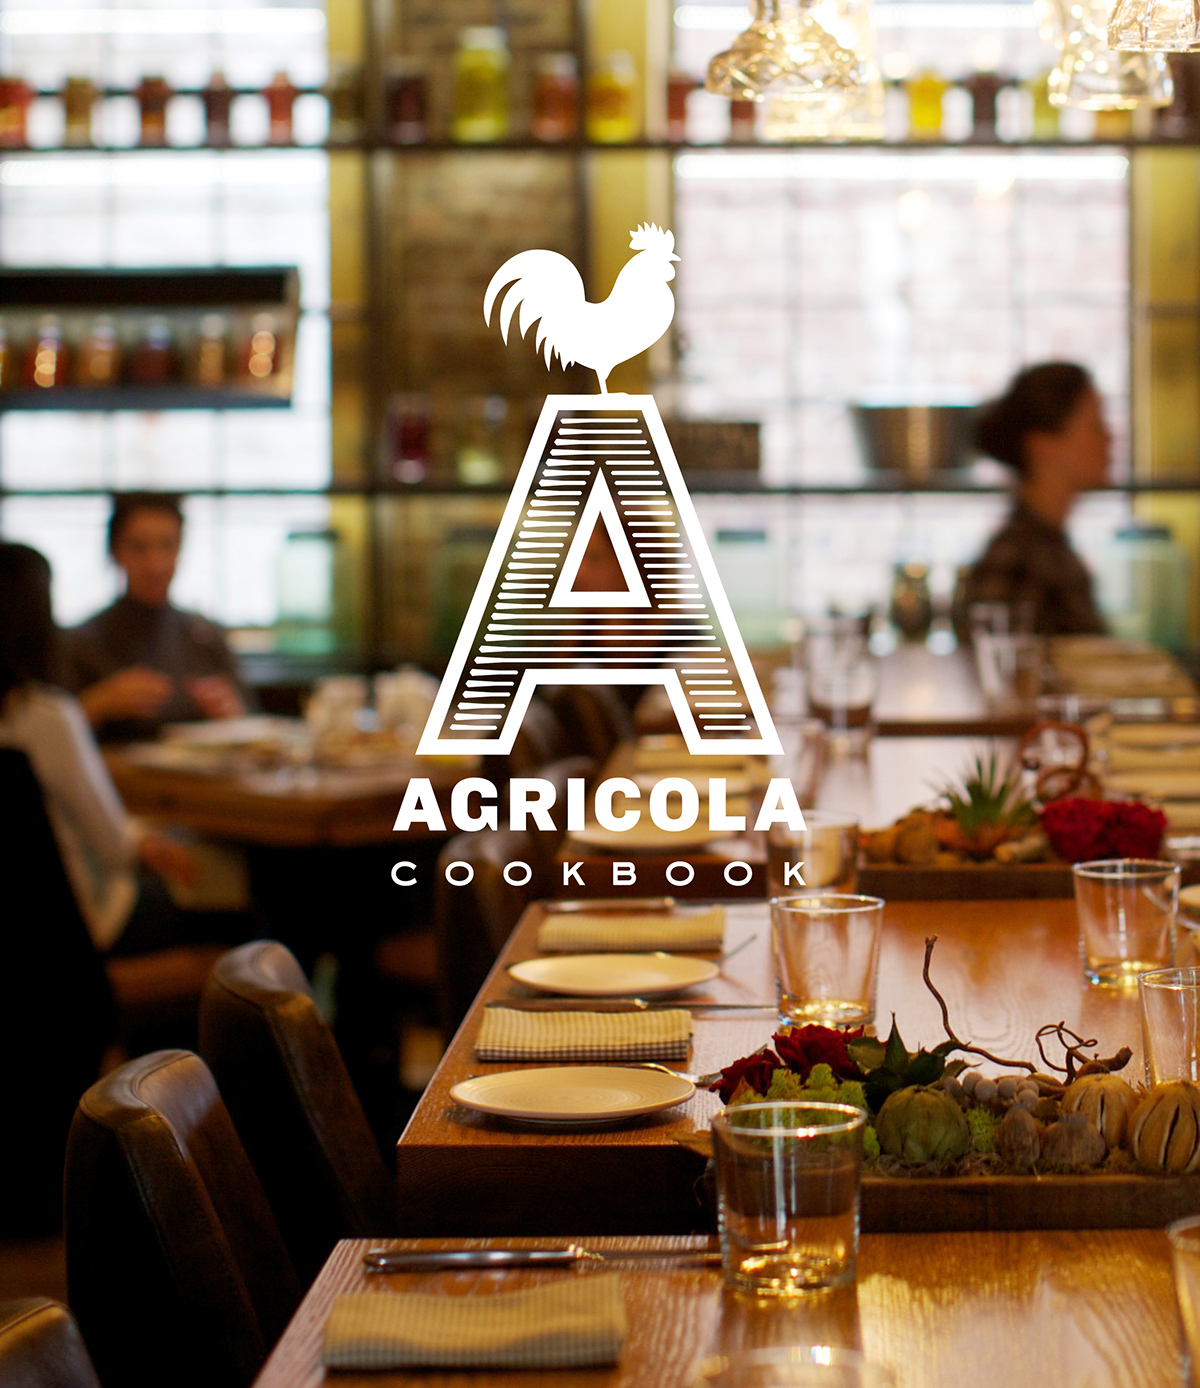 agricola farm to table sustainable cooking farm organic food agriculture new jersey princeton restaurant heritage Single origin farming Josh Thomsen cooking